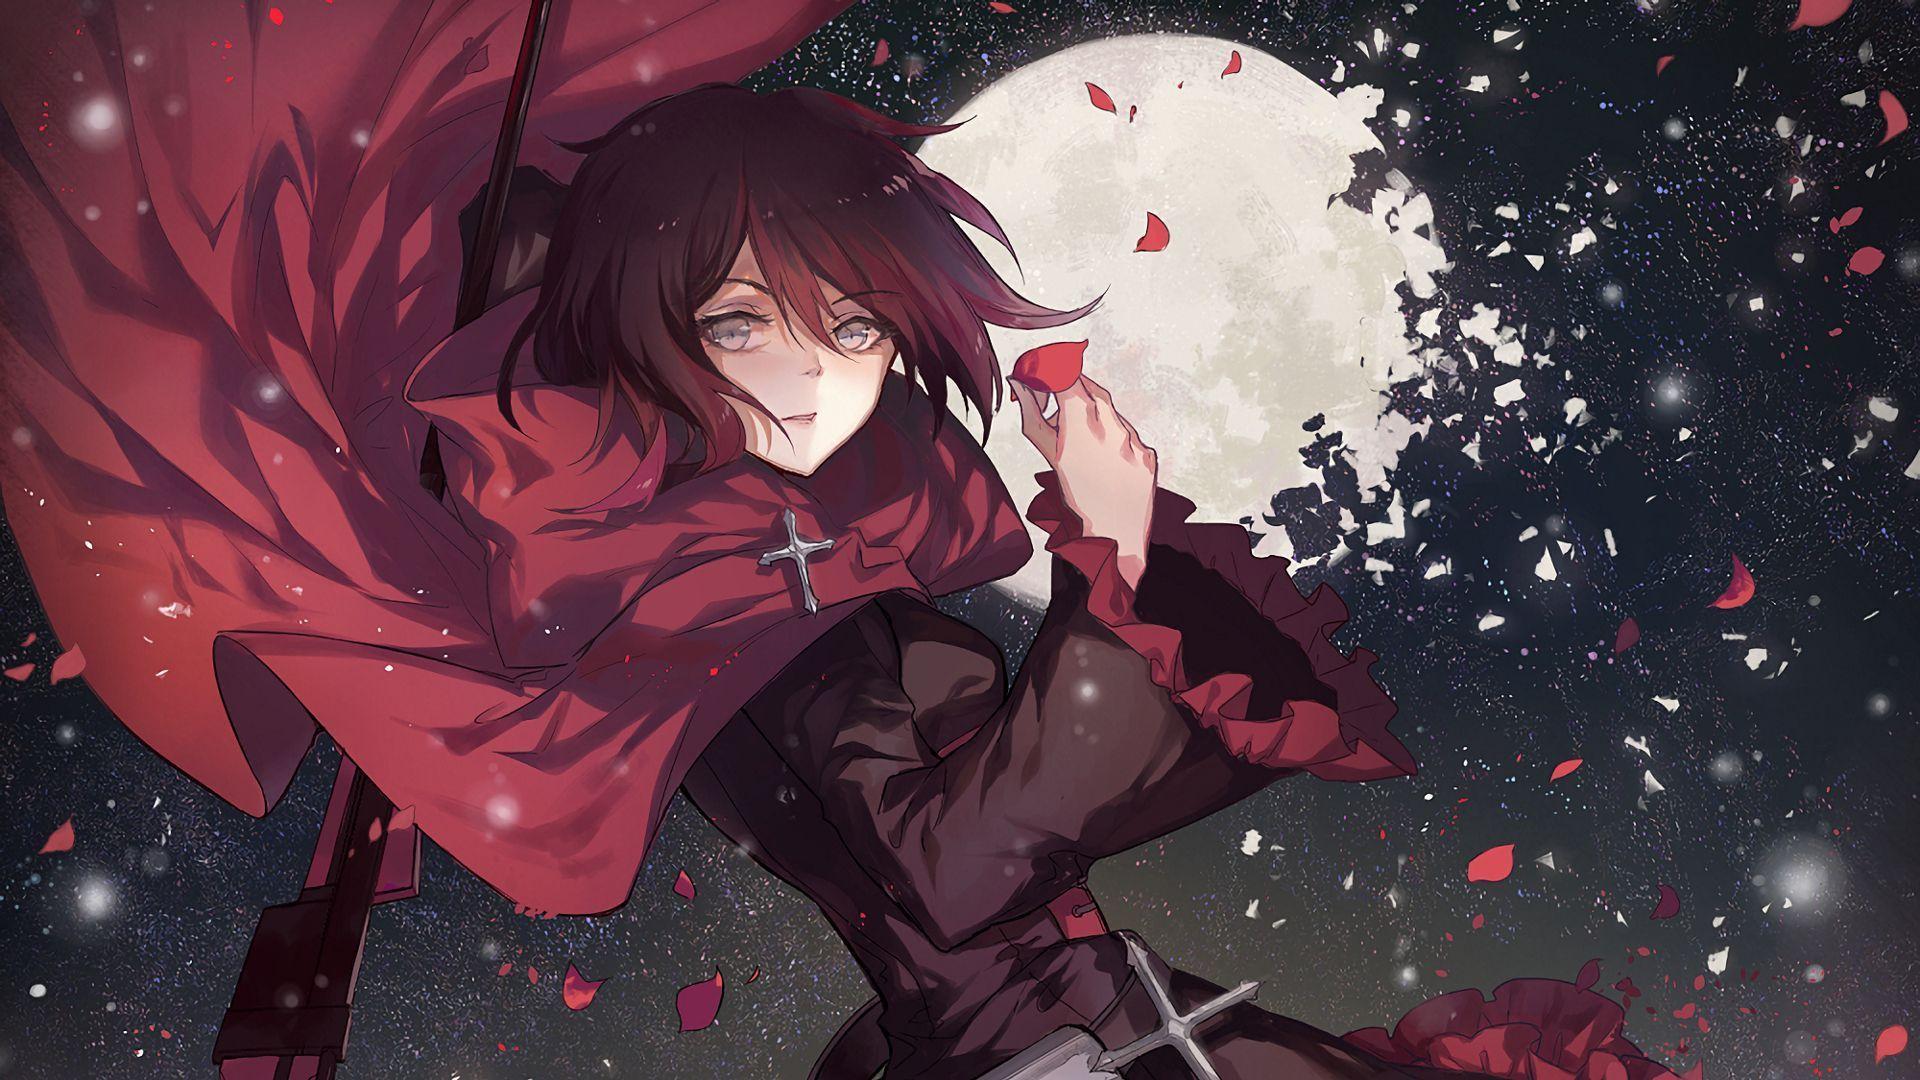 Aesthetic Tumblr Grunge Animeaesthetic Anime Rose Redro - Anime Aesthetic  Flower Gif Transparent PNG - 515x451 - Free Download on NicePNG